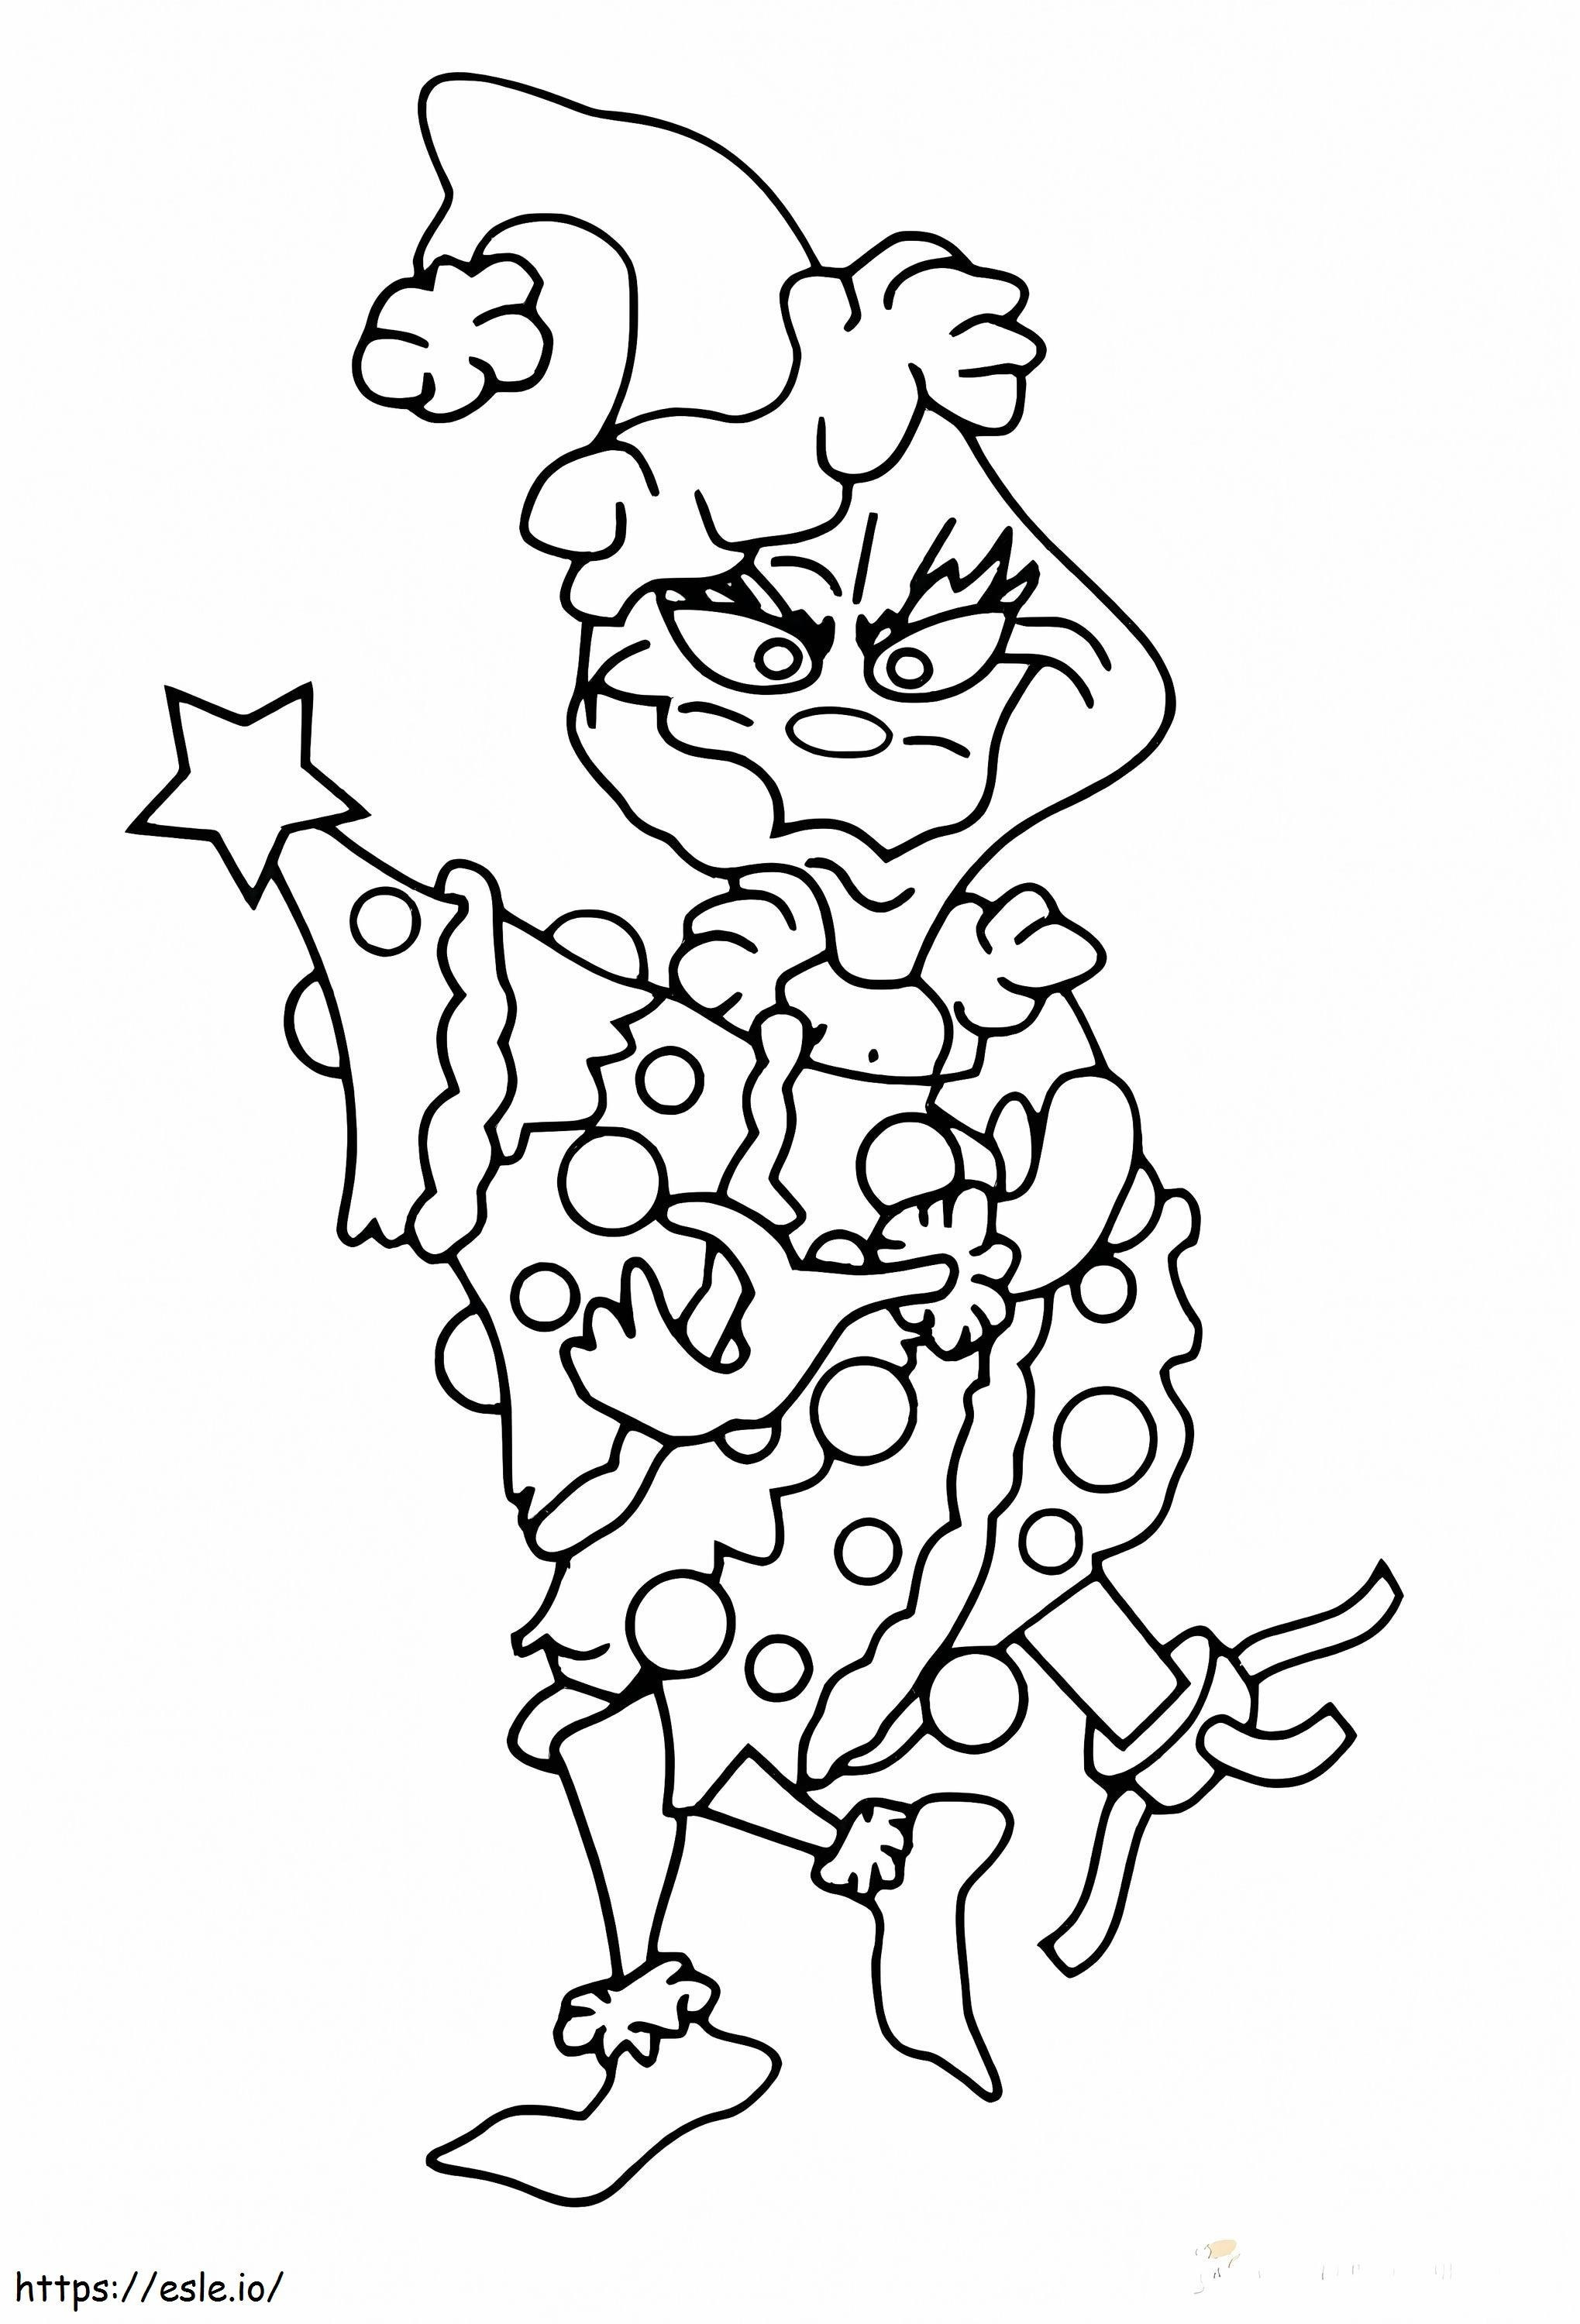 1571887271 The Grinch Printable The How The Stole Coloring Book Free Printable Coloring How The The Grinch Printables Free ausmalbilder